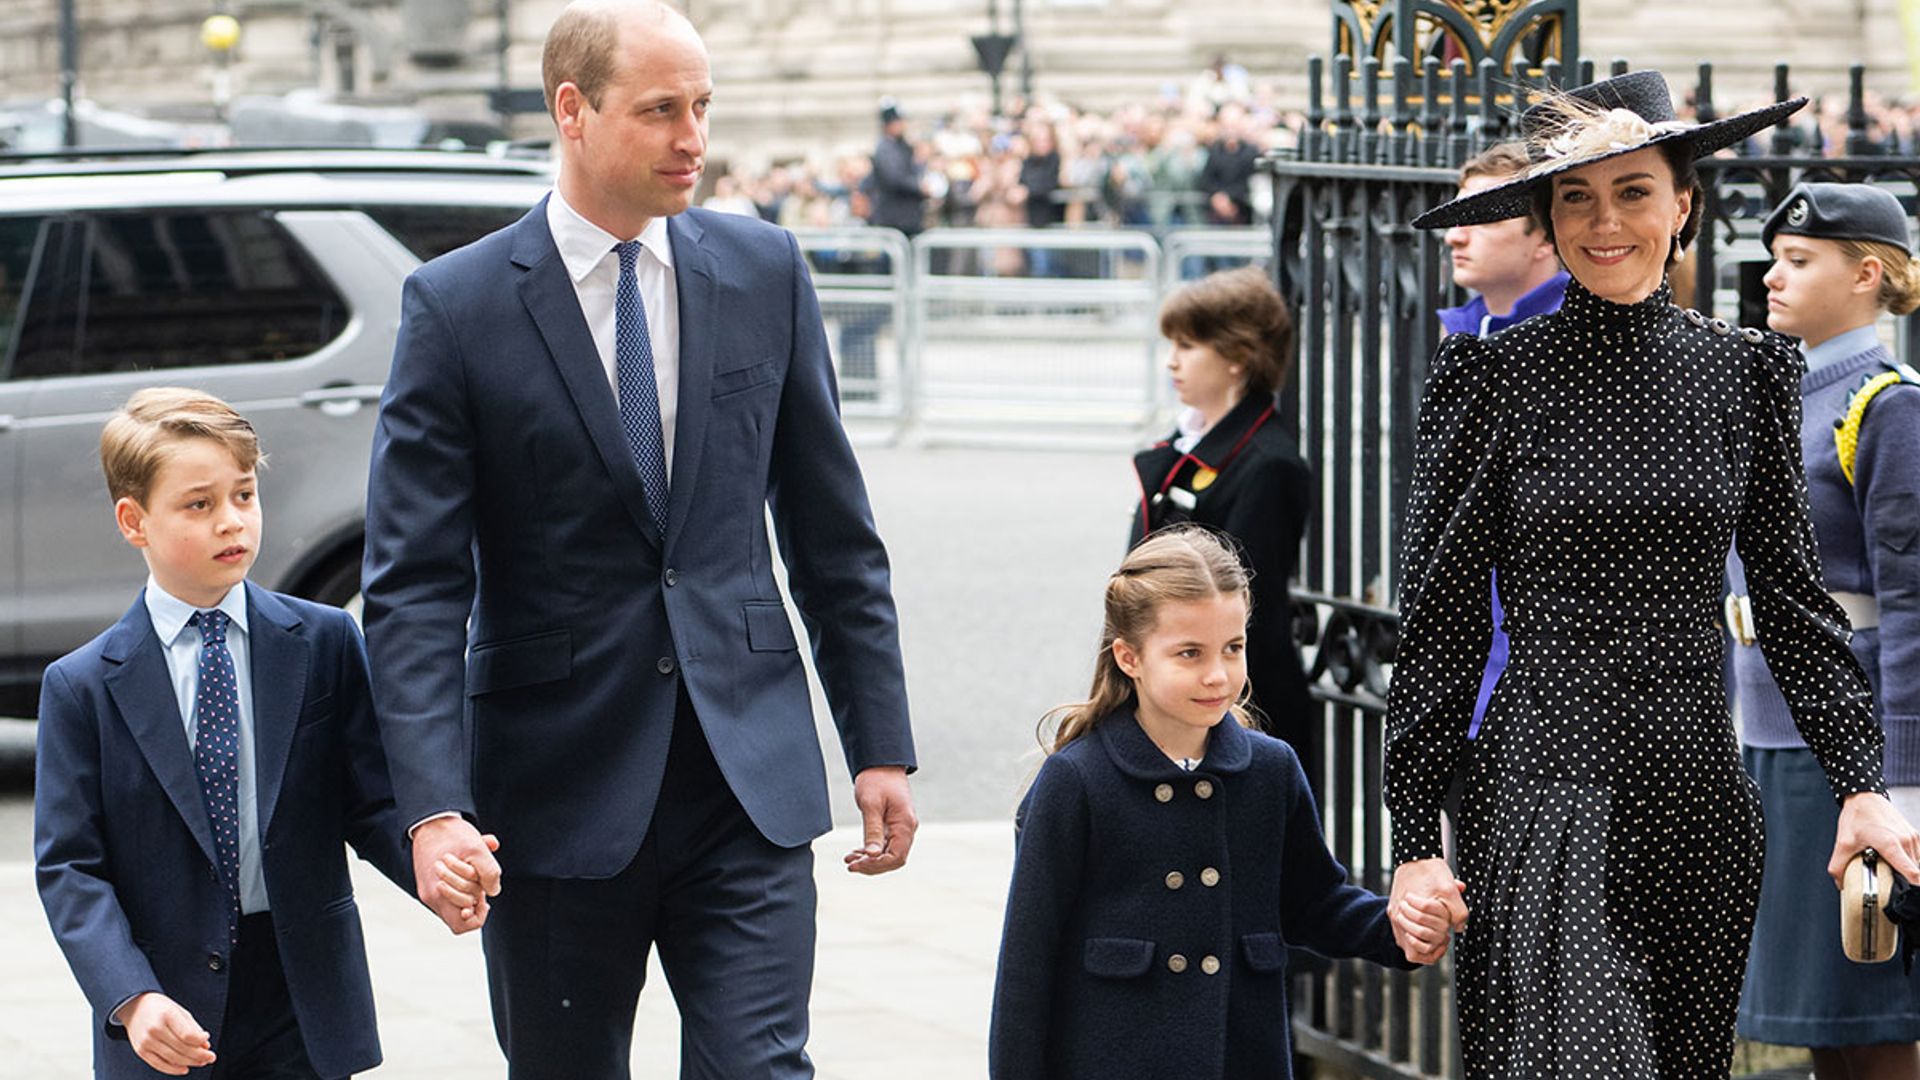 Kate Middleton and Prince William’s Easter holiday plans with George, Charlotte and Louis revealed